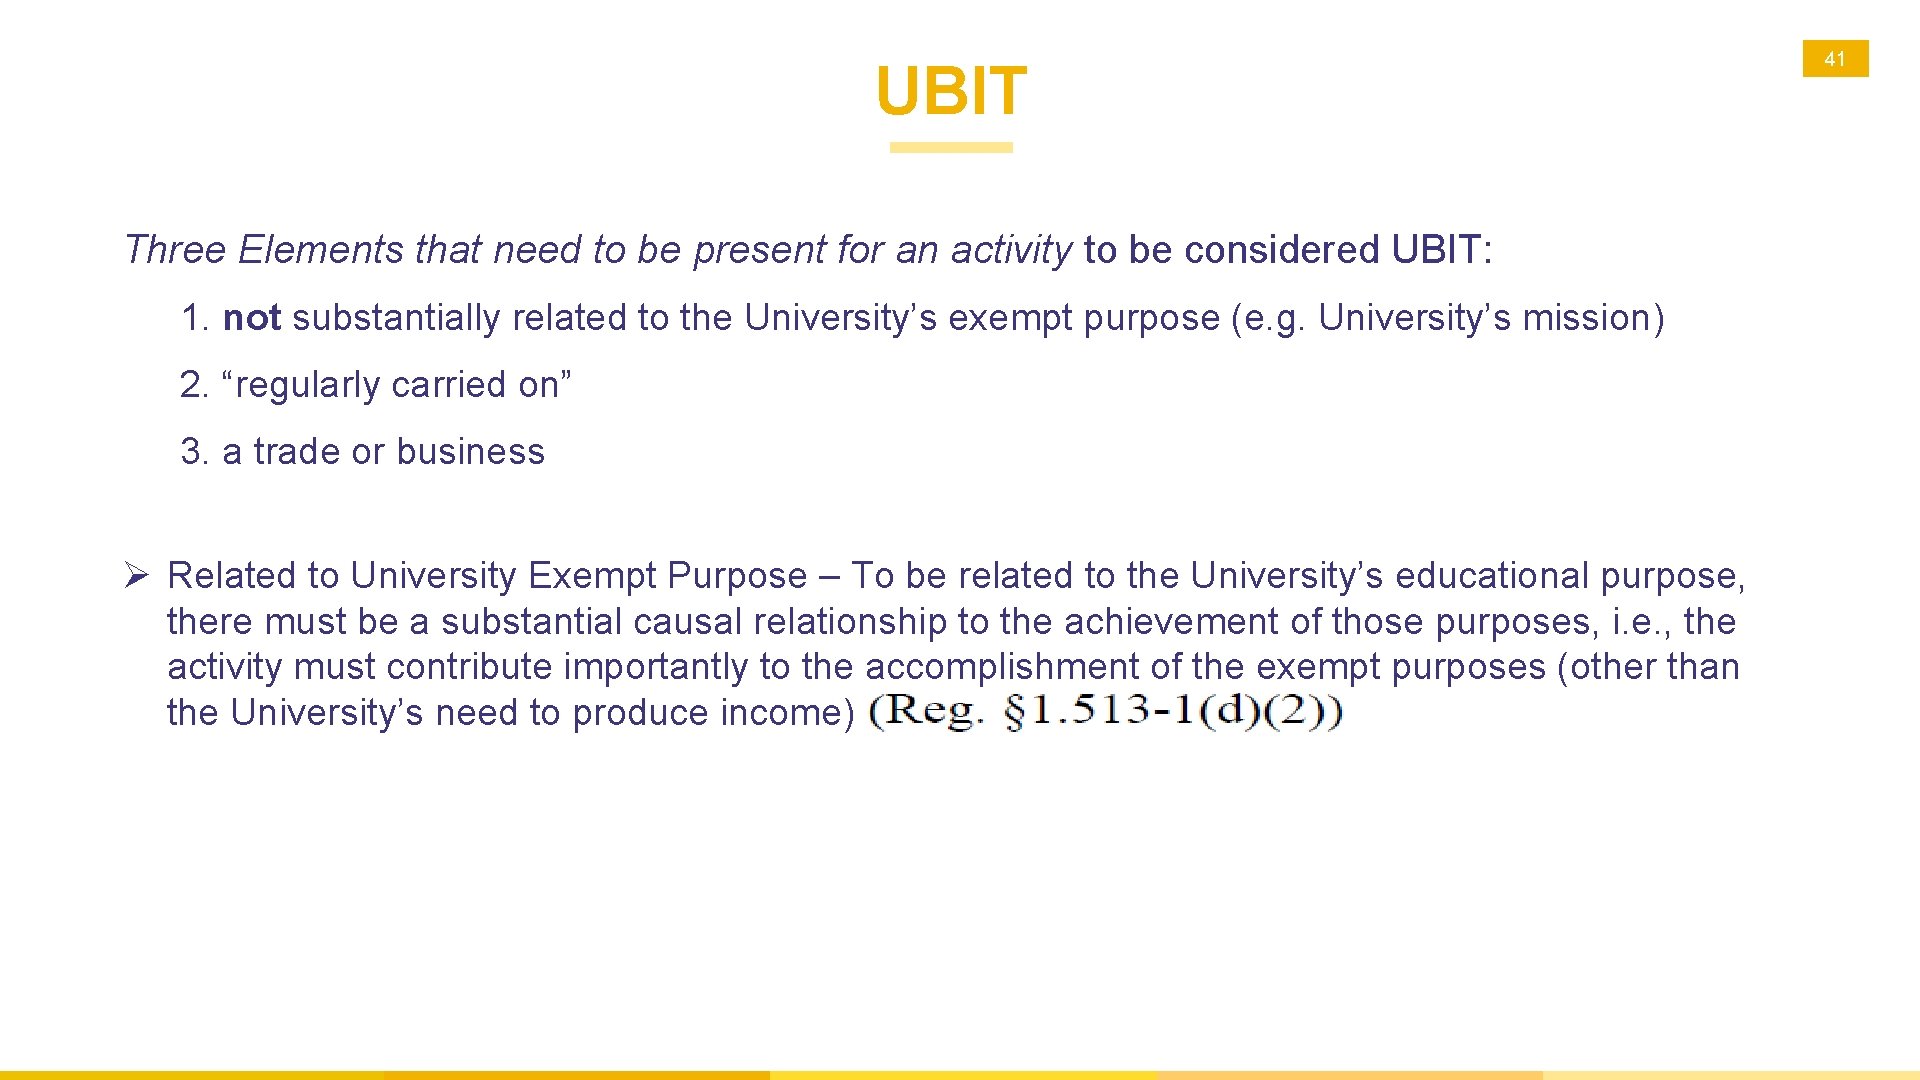 UBIT Three Elements that need to be present for an activity to be considered